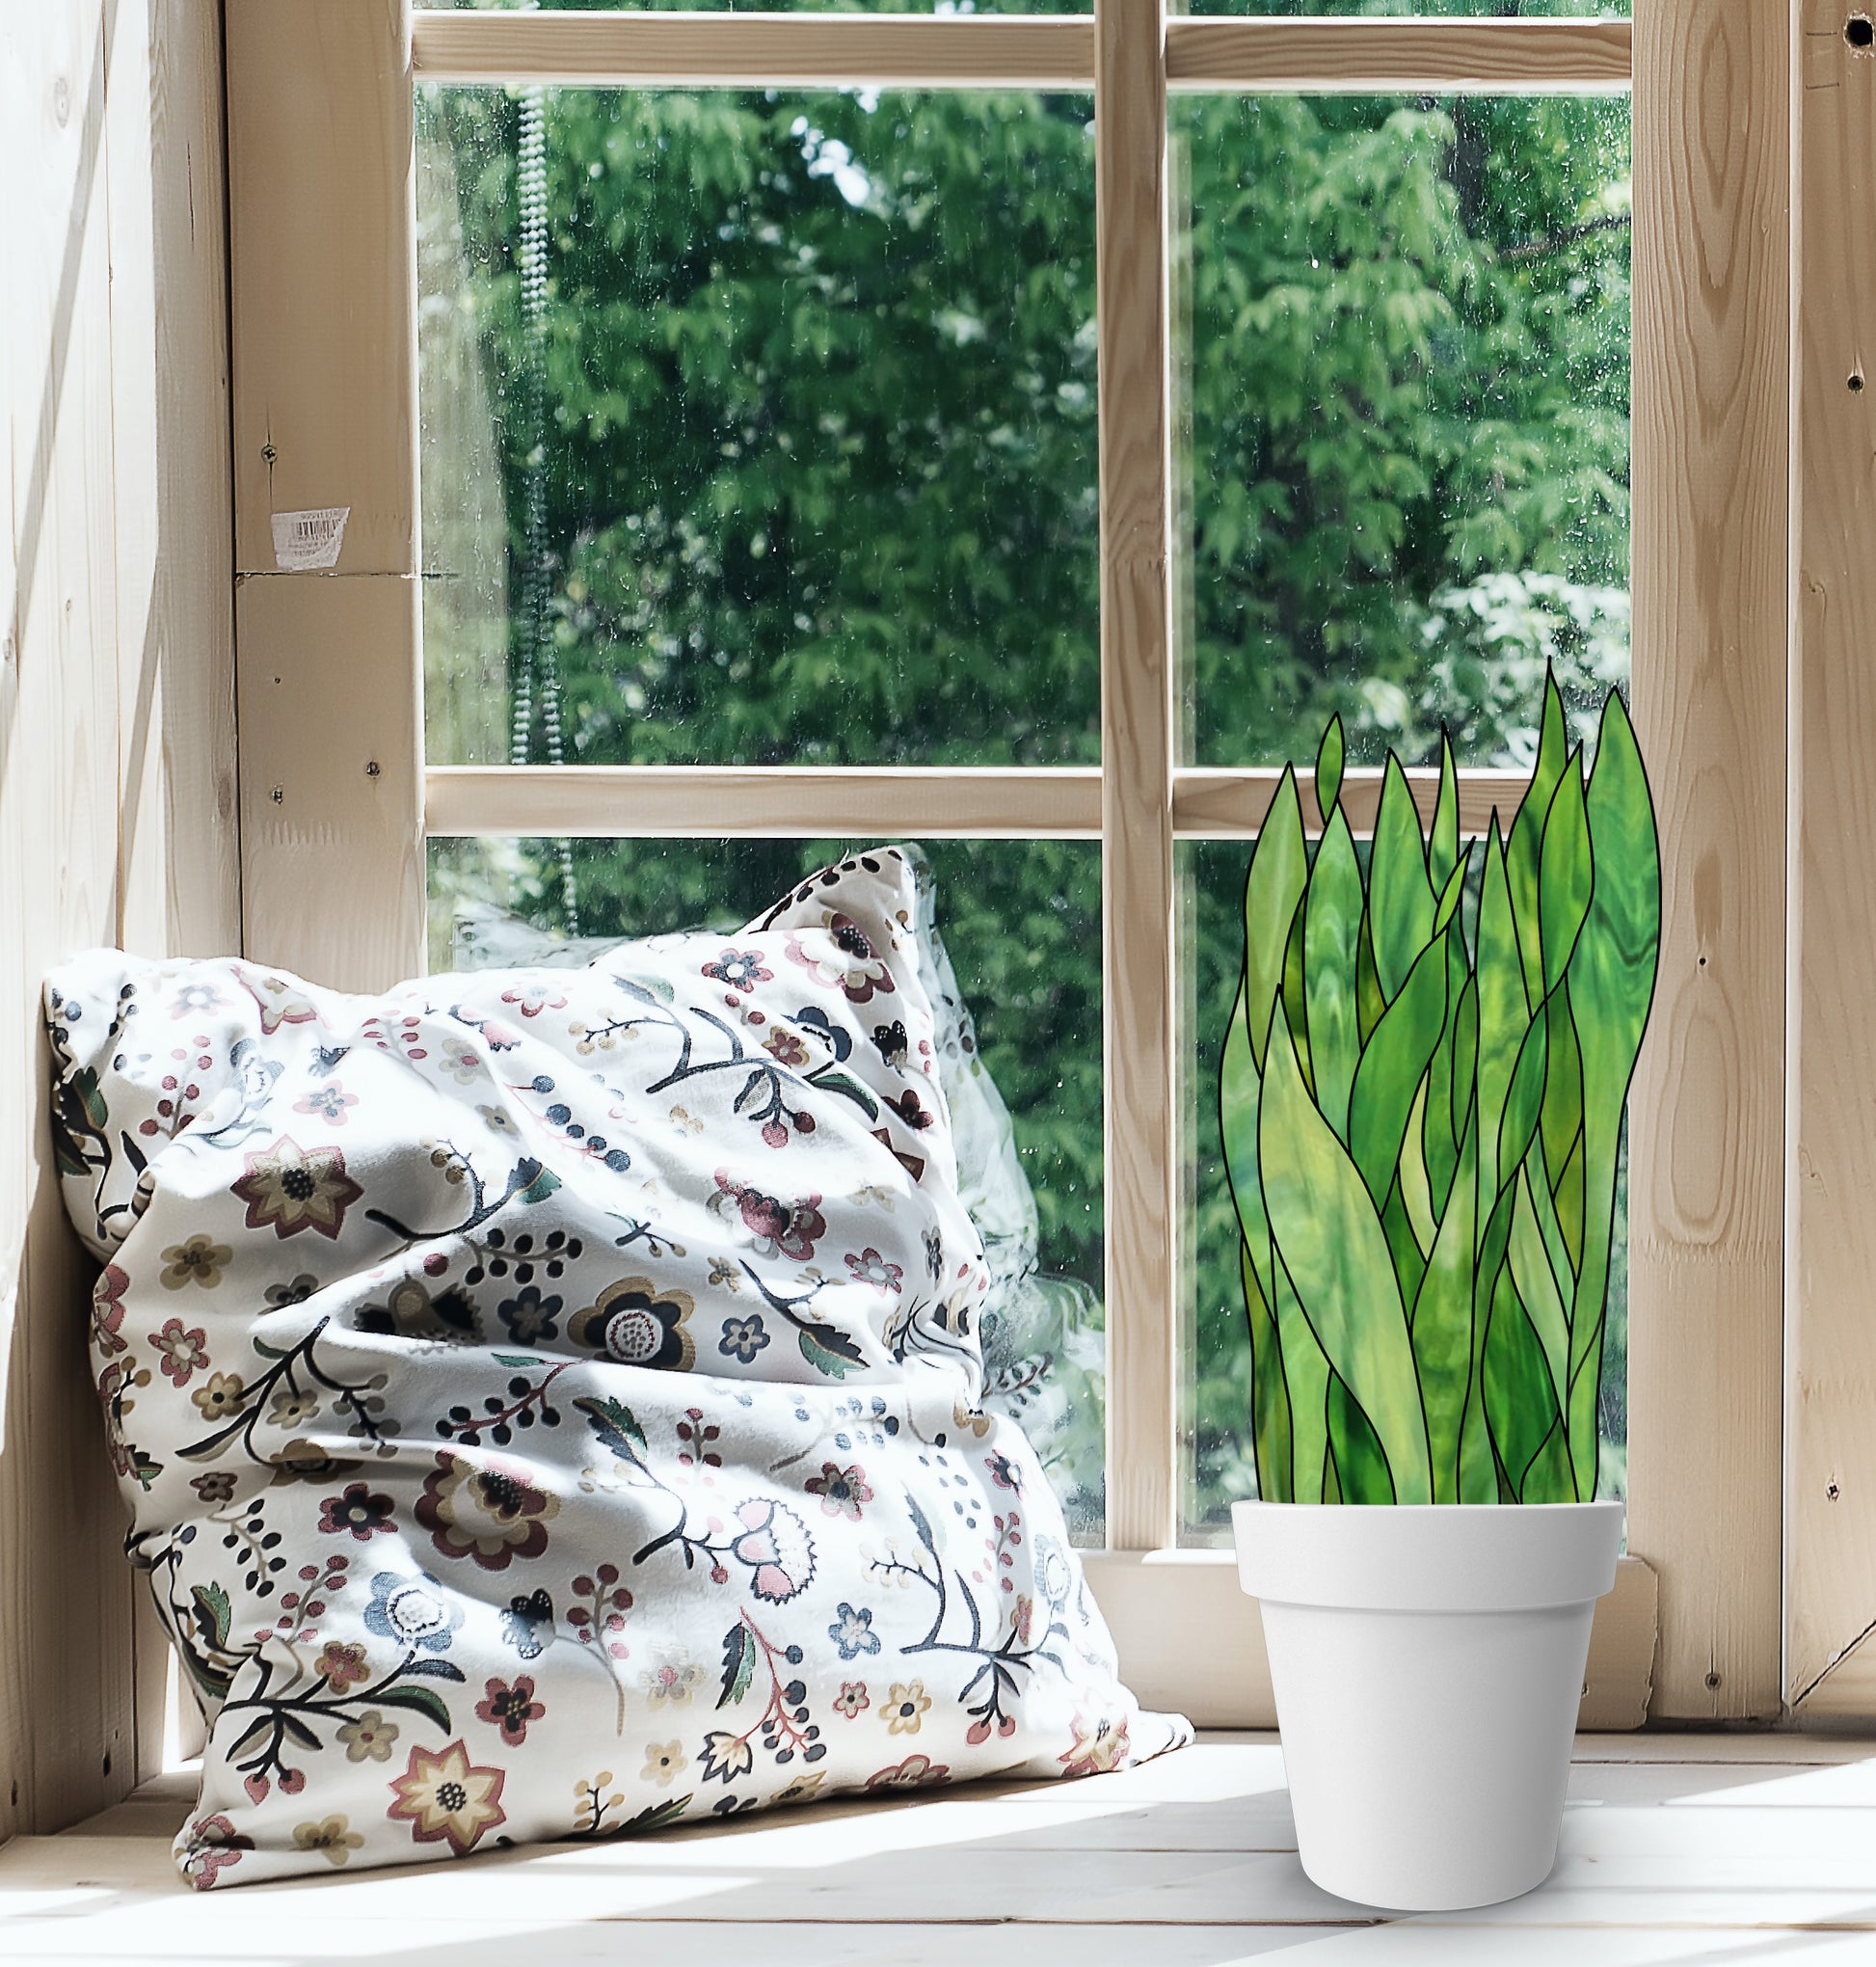 Original stained glass pattern for snake plant plant stem, instant PDF download, in a window with a pillow